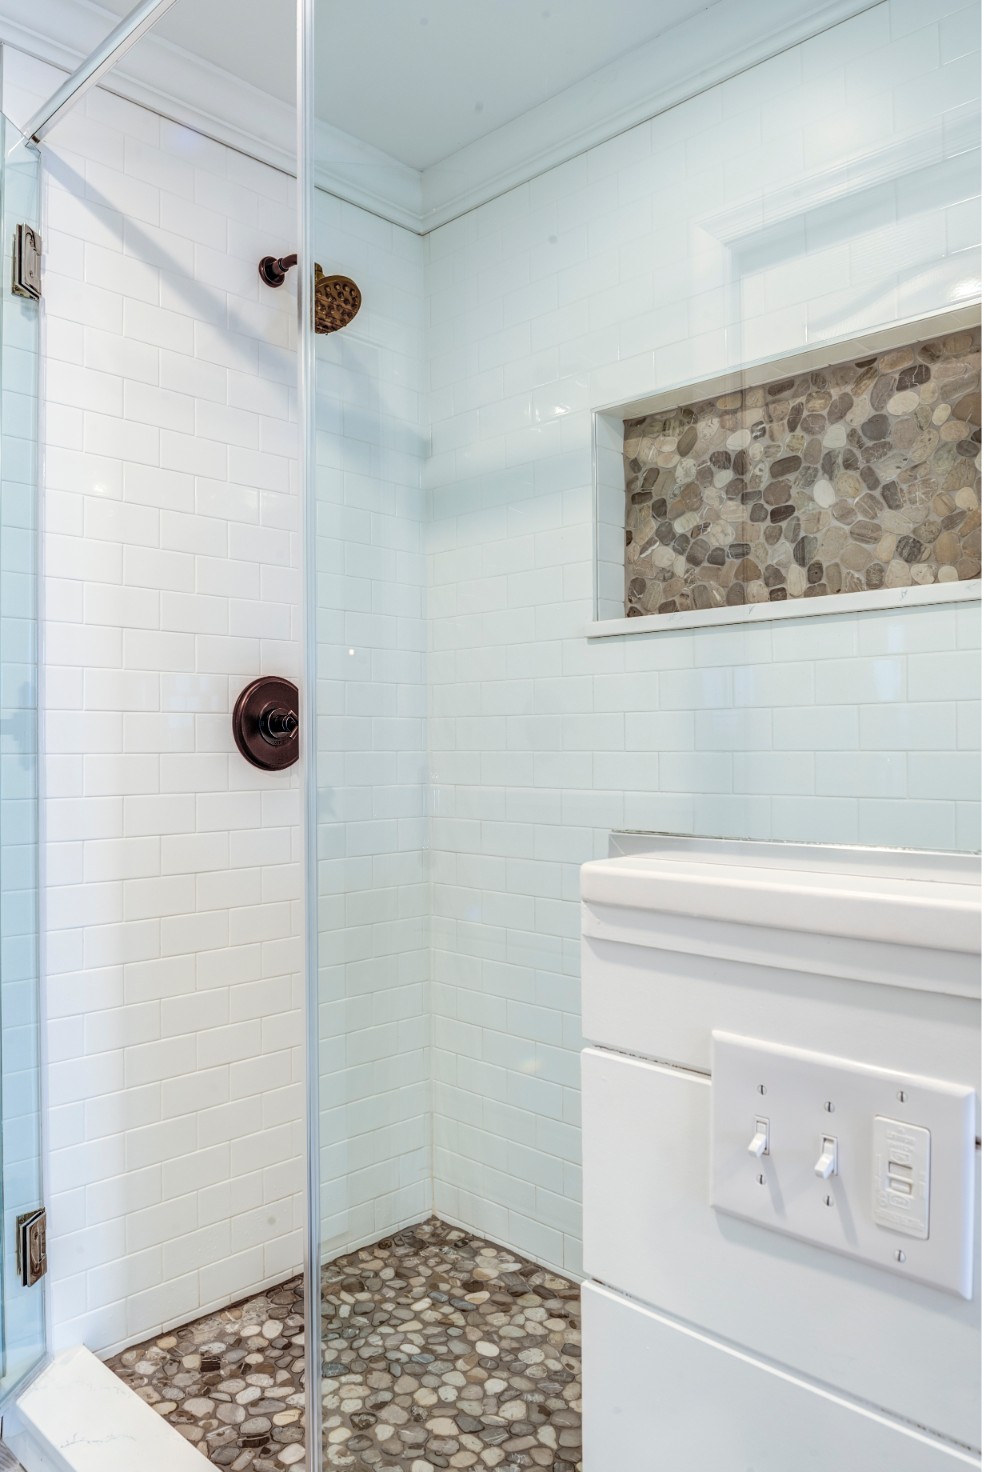 Hatteras Drive Master Suite in Bethany Beach DE - Master Bathroom - Shower with White Wall Tiles and Stone Mosaic Floor